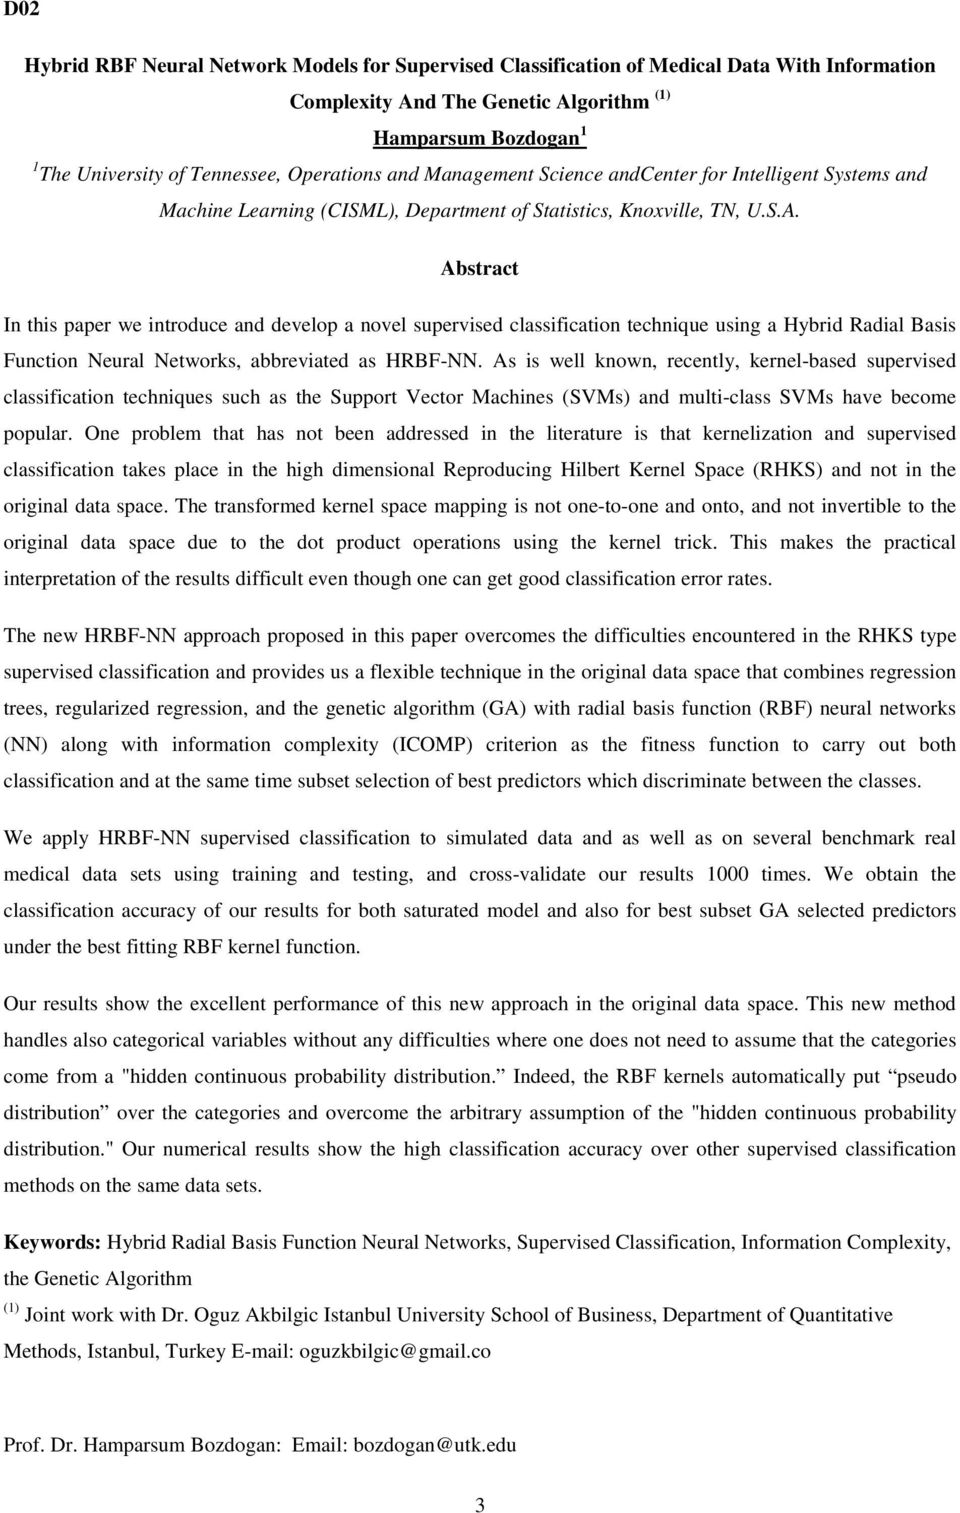 Abstract In this paper we introduce and develop a novel supervised classification technique using a Hybrid Radial Basis Function Neural Networks, abbreviated as HRBF-NN.